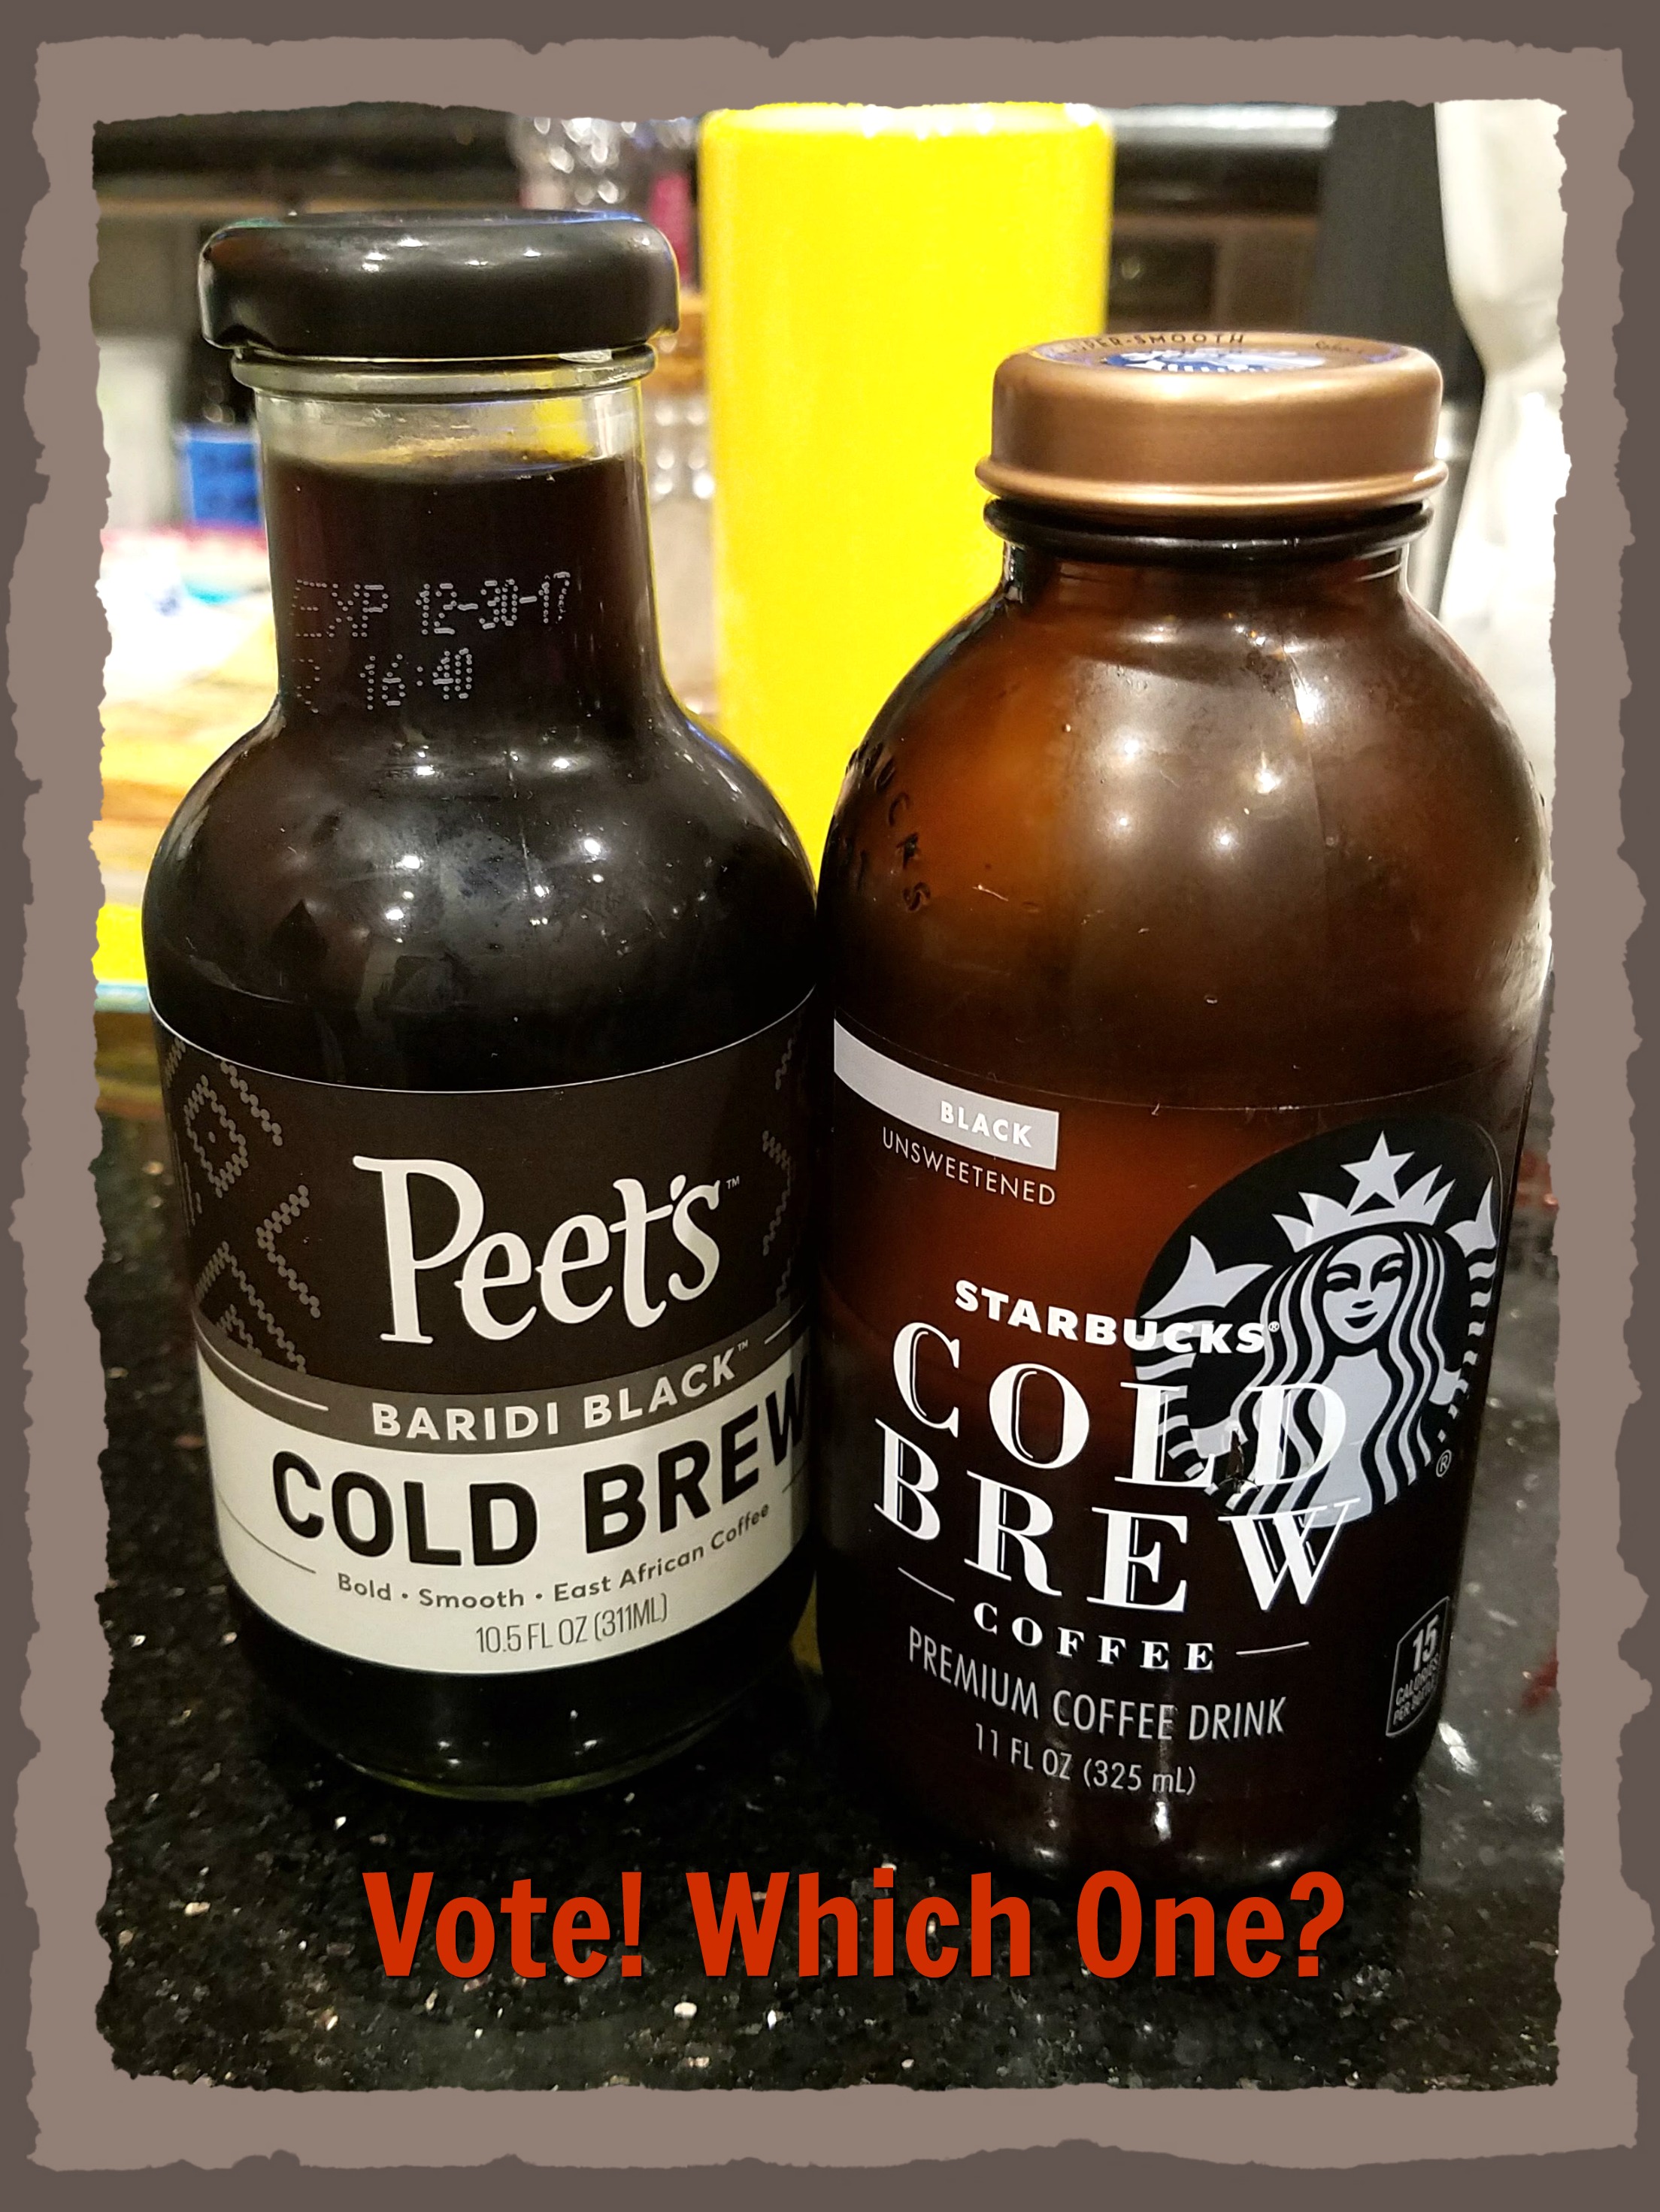 Image of Peets and Starbucks Bottled Cold Brews side by side